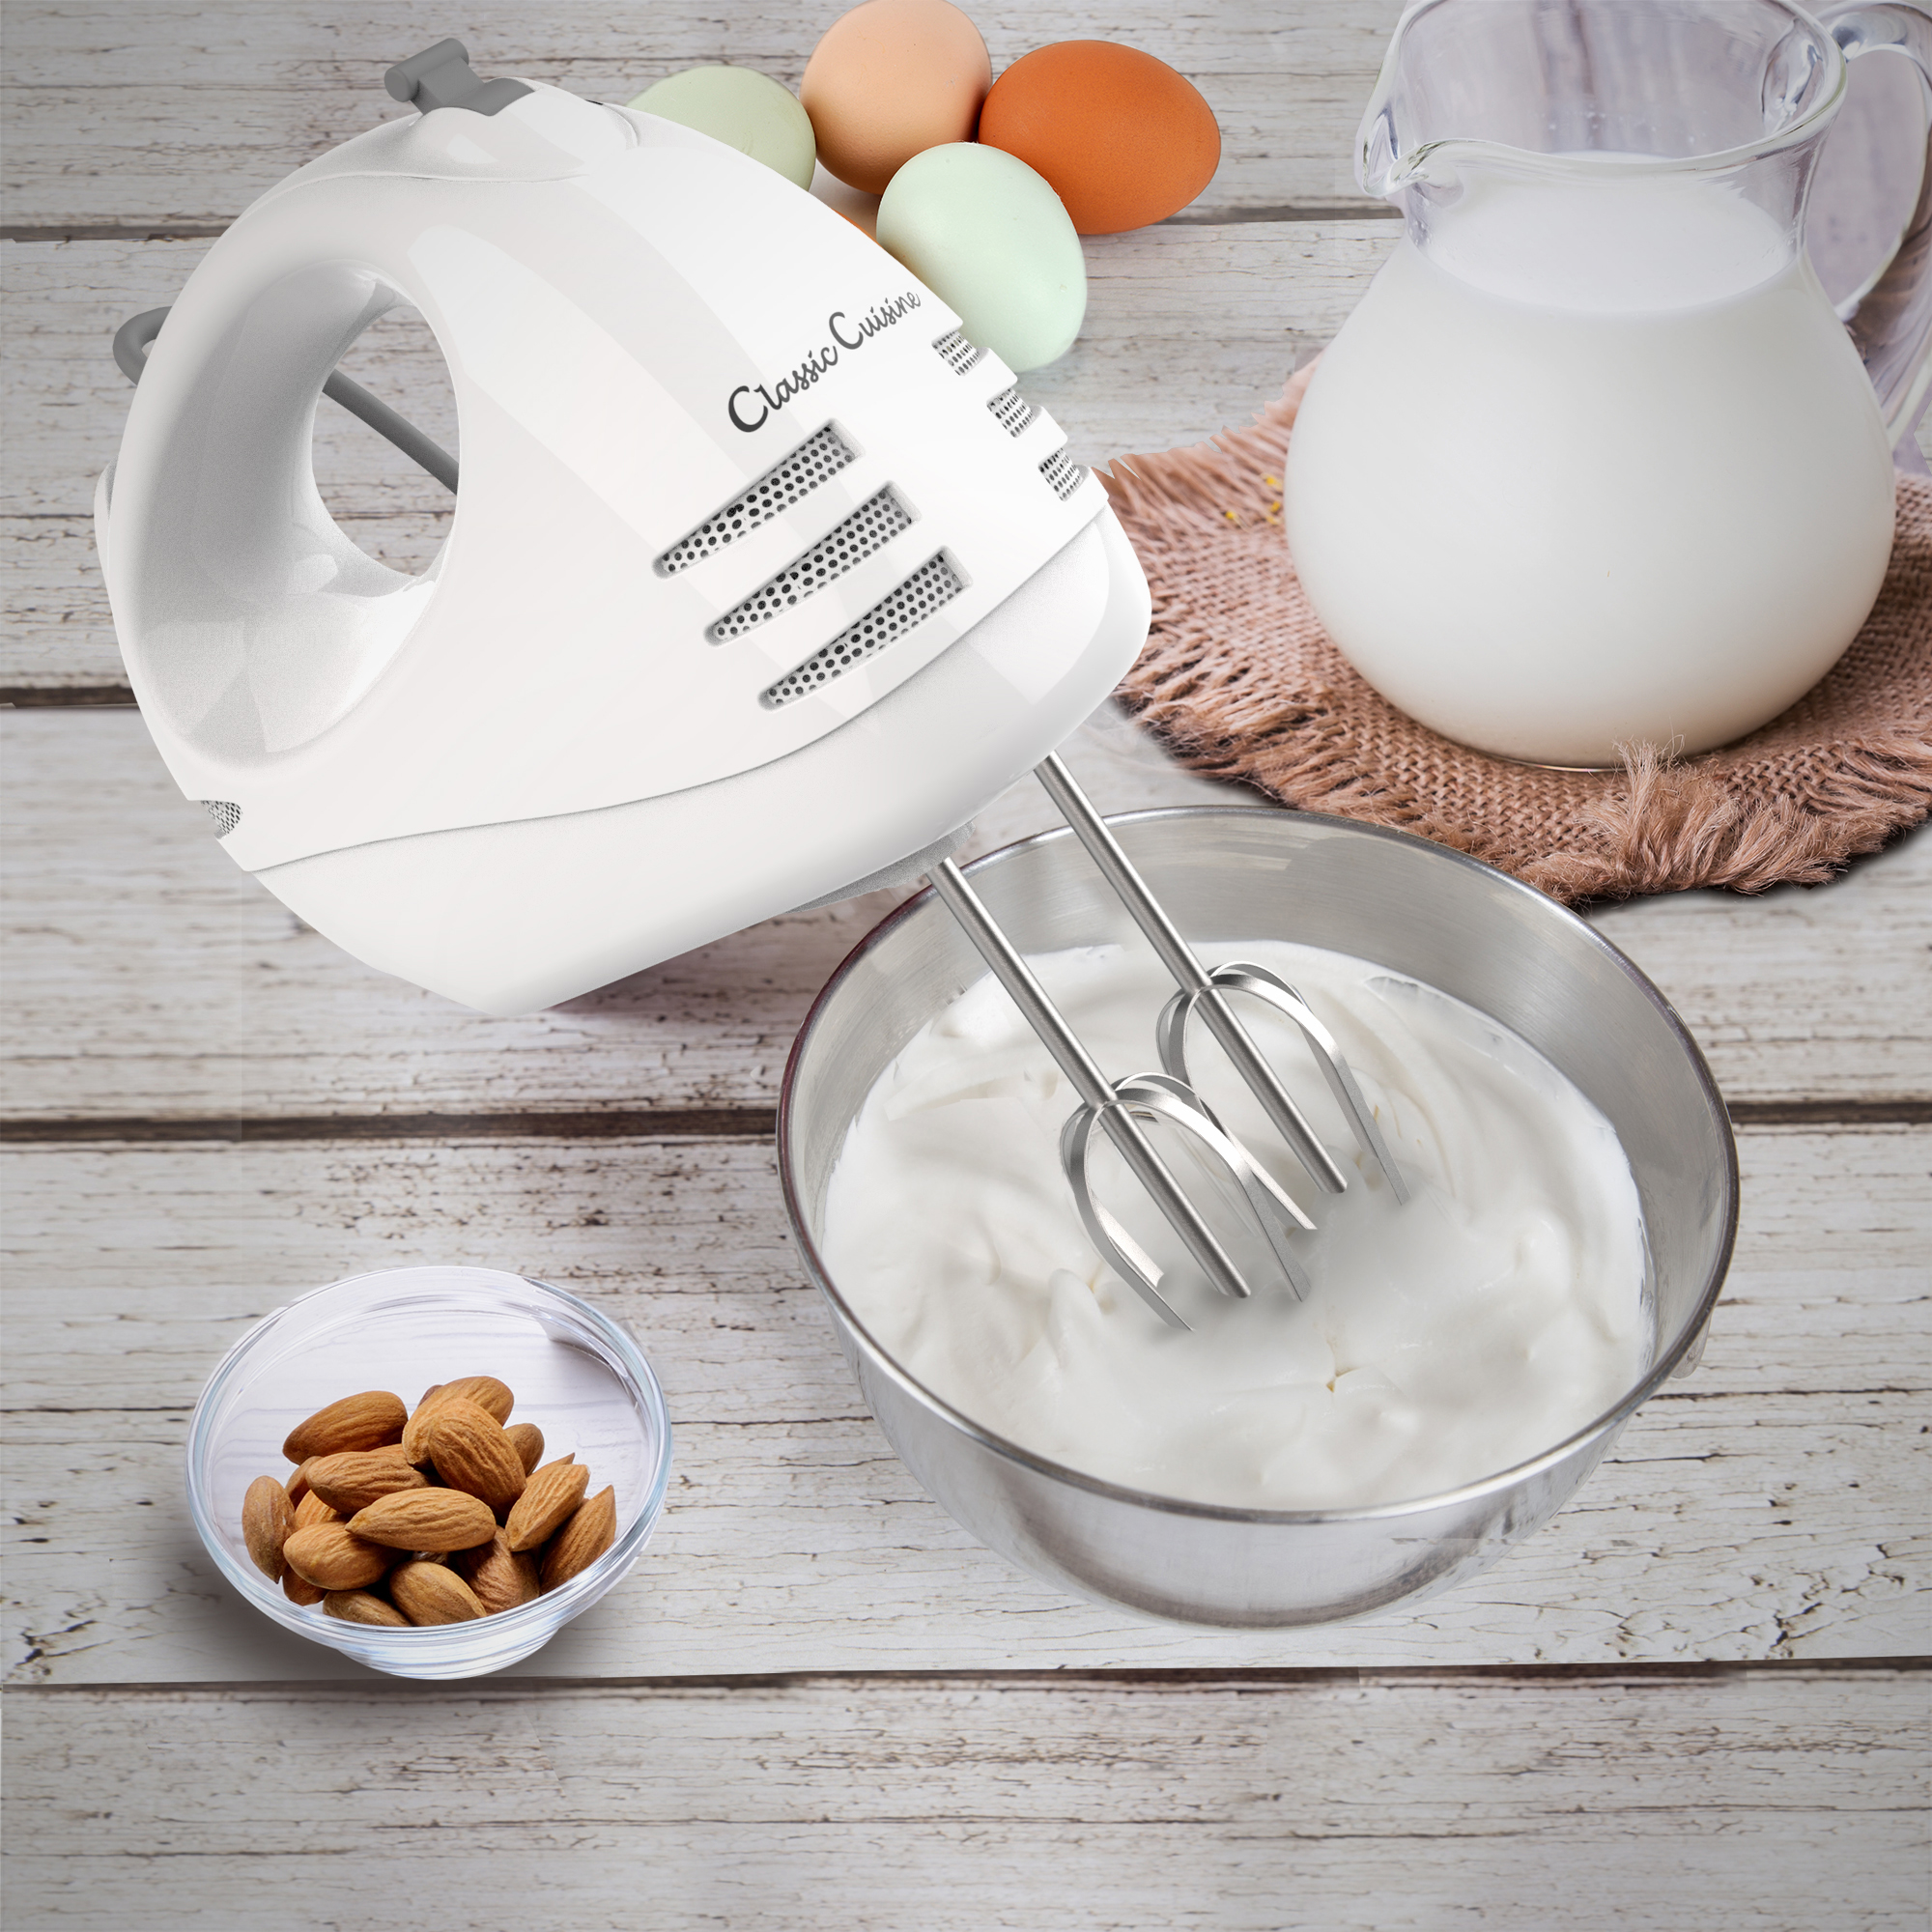 Electric Hand Mixer with Stainless Steel Beater Blades and Dough Hook- 6 Speed Electric Mixer 2 Prong Cord